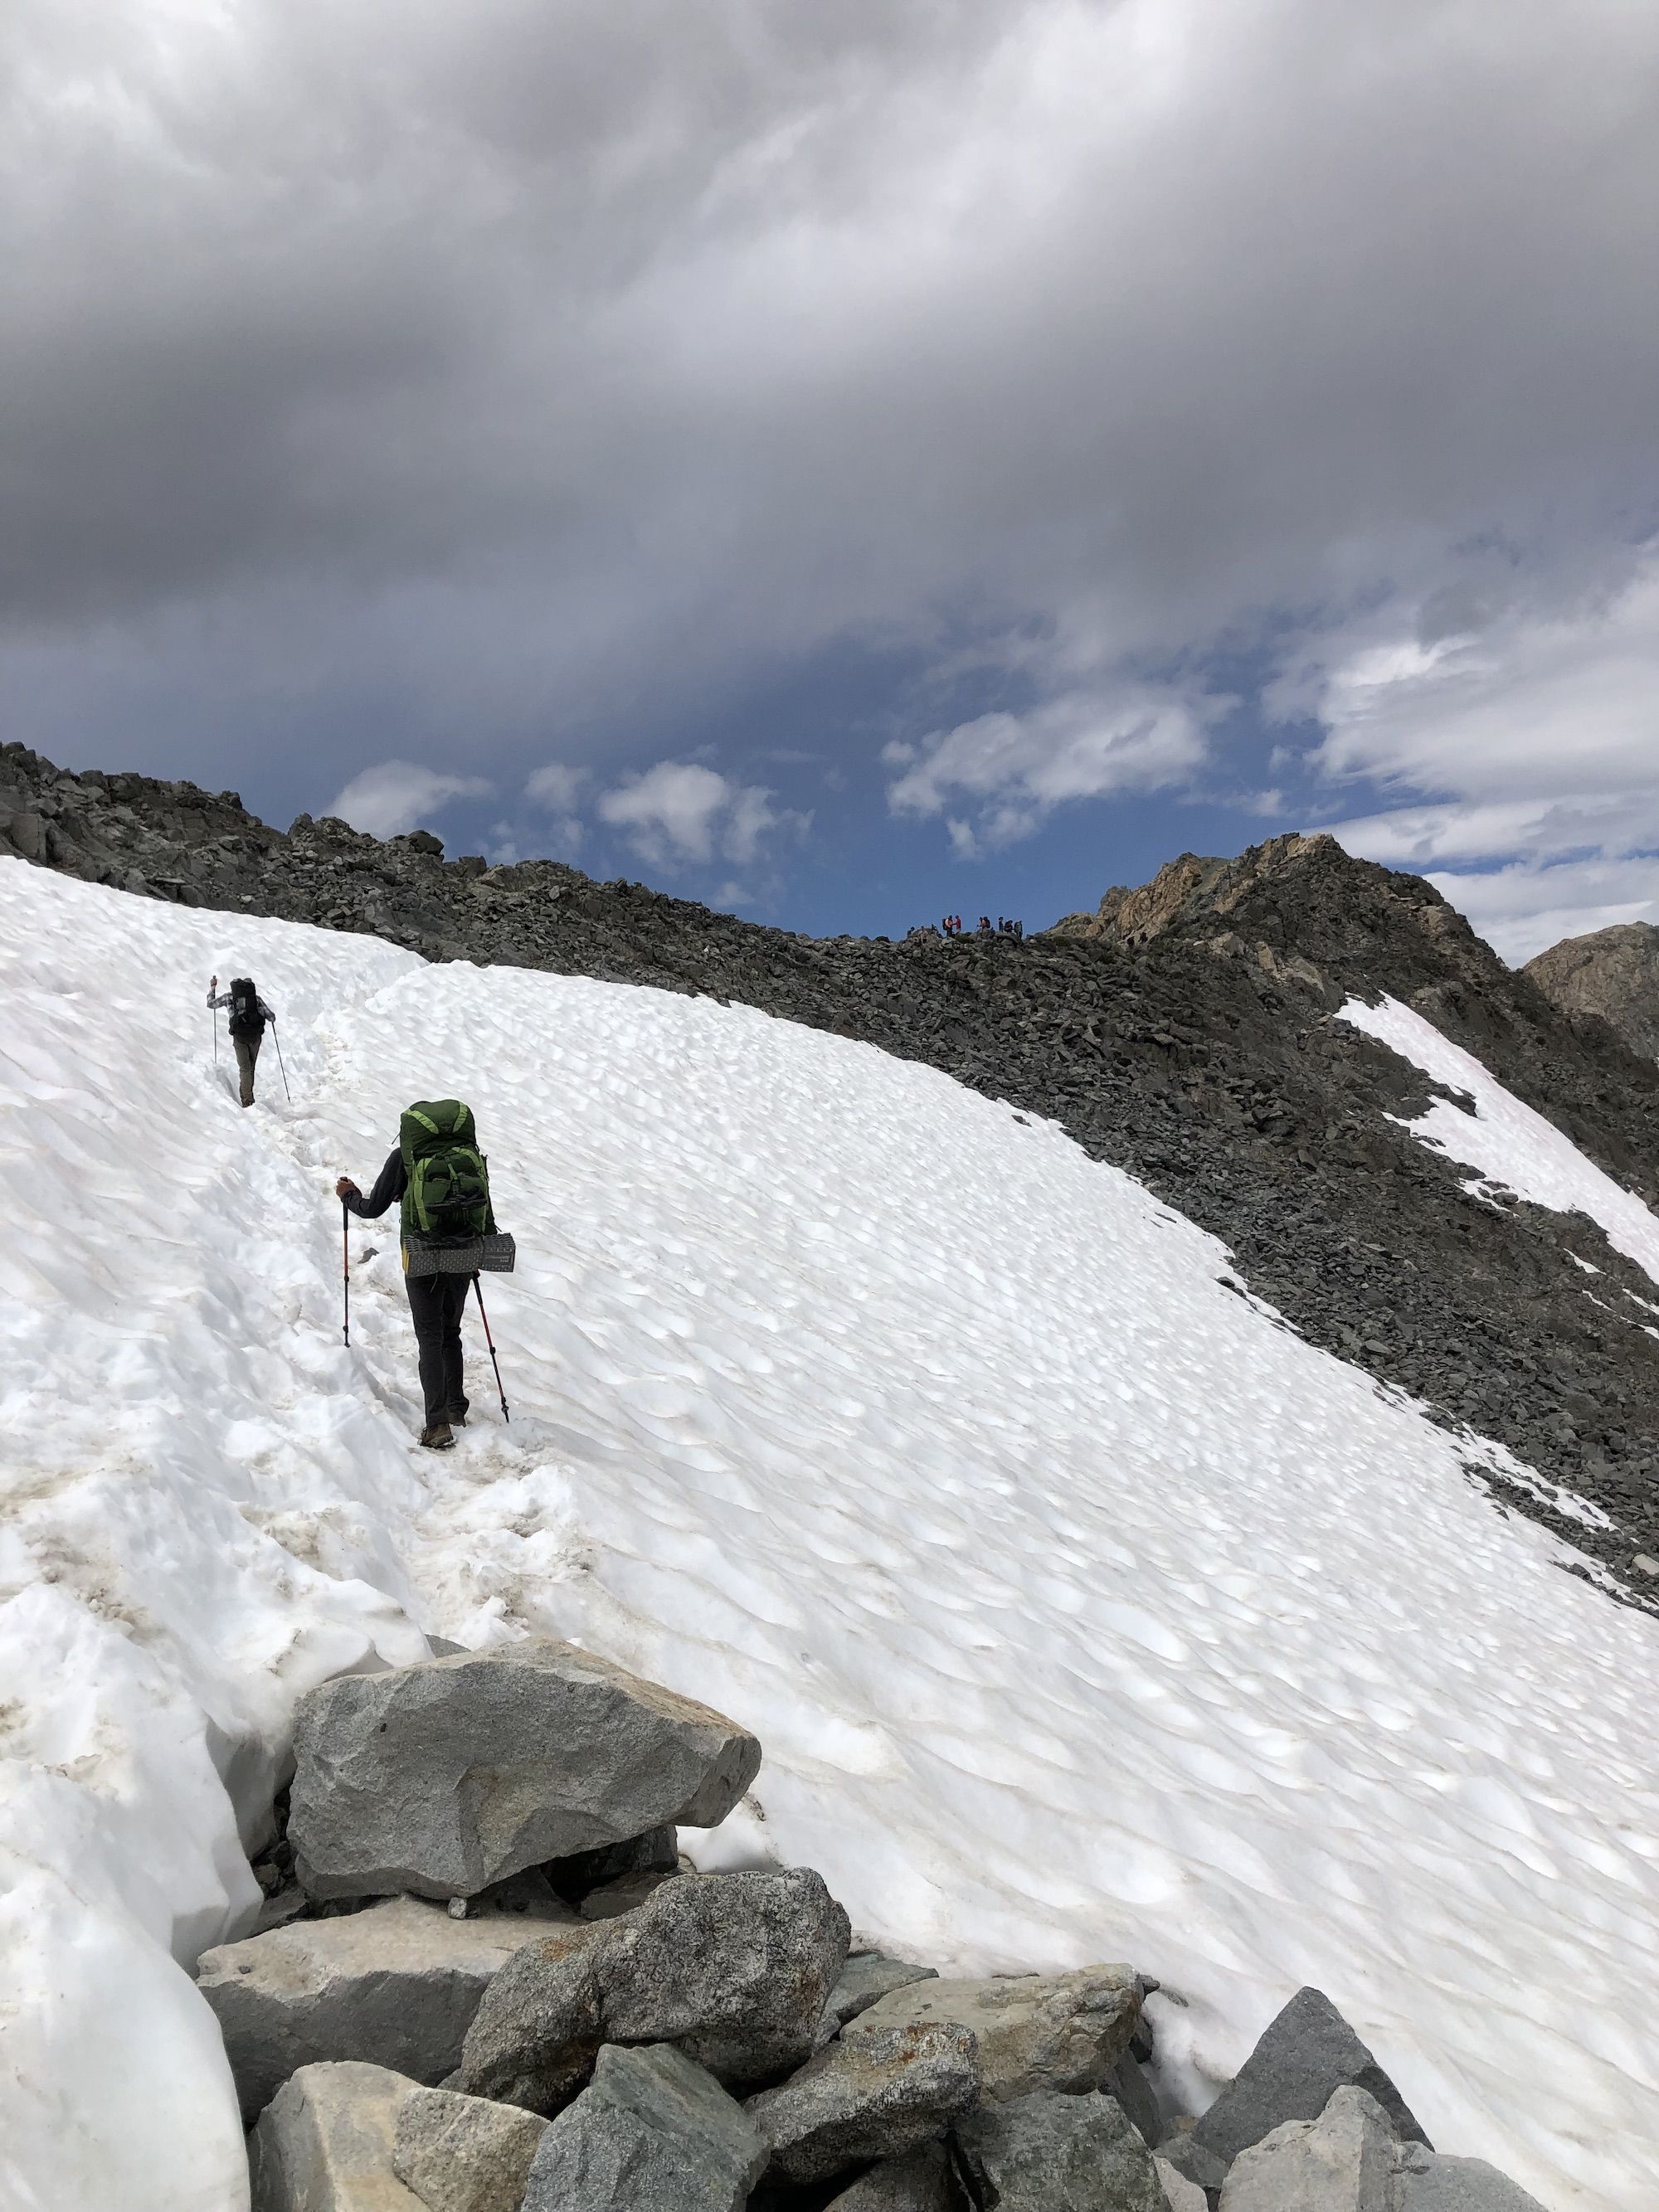 Two hikers crossing an angled snow field